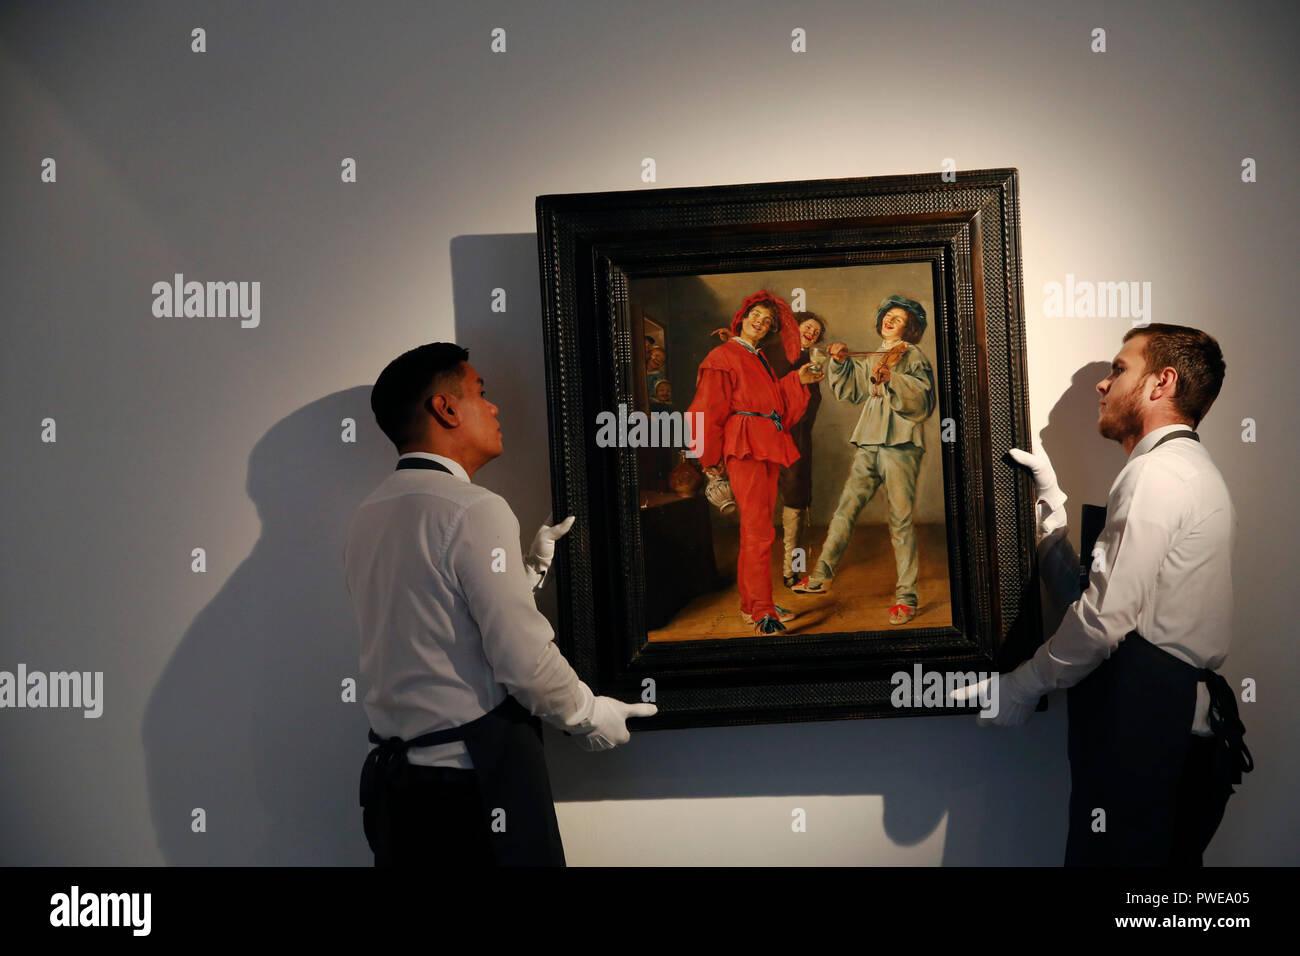 London, UK, 16th Oct 2018. Christie's art handlers hold Judith Leyster 's artwork 'Merry Company' at Christie's Auction House in London, UK, Tuesday October 16, 2017. The piece is expected to achieve up to £2.5million when is comes to auction as part of the Albada Jelgersma Collection sale during Christie's Classic Week in December. Photograph : Credit: Luke MacGregor/Alamy Live News Stock Photo